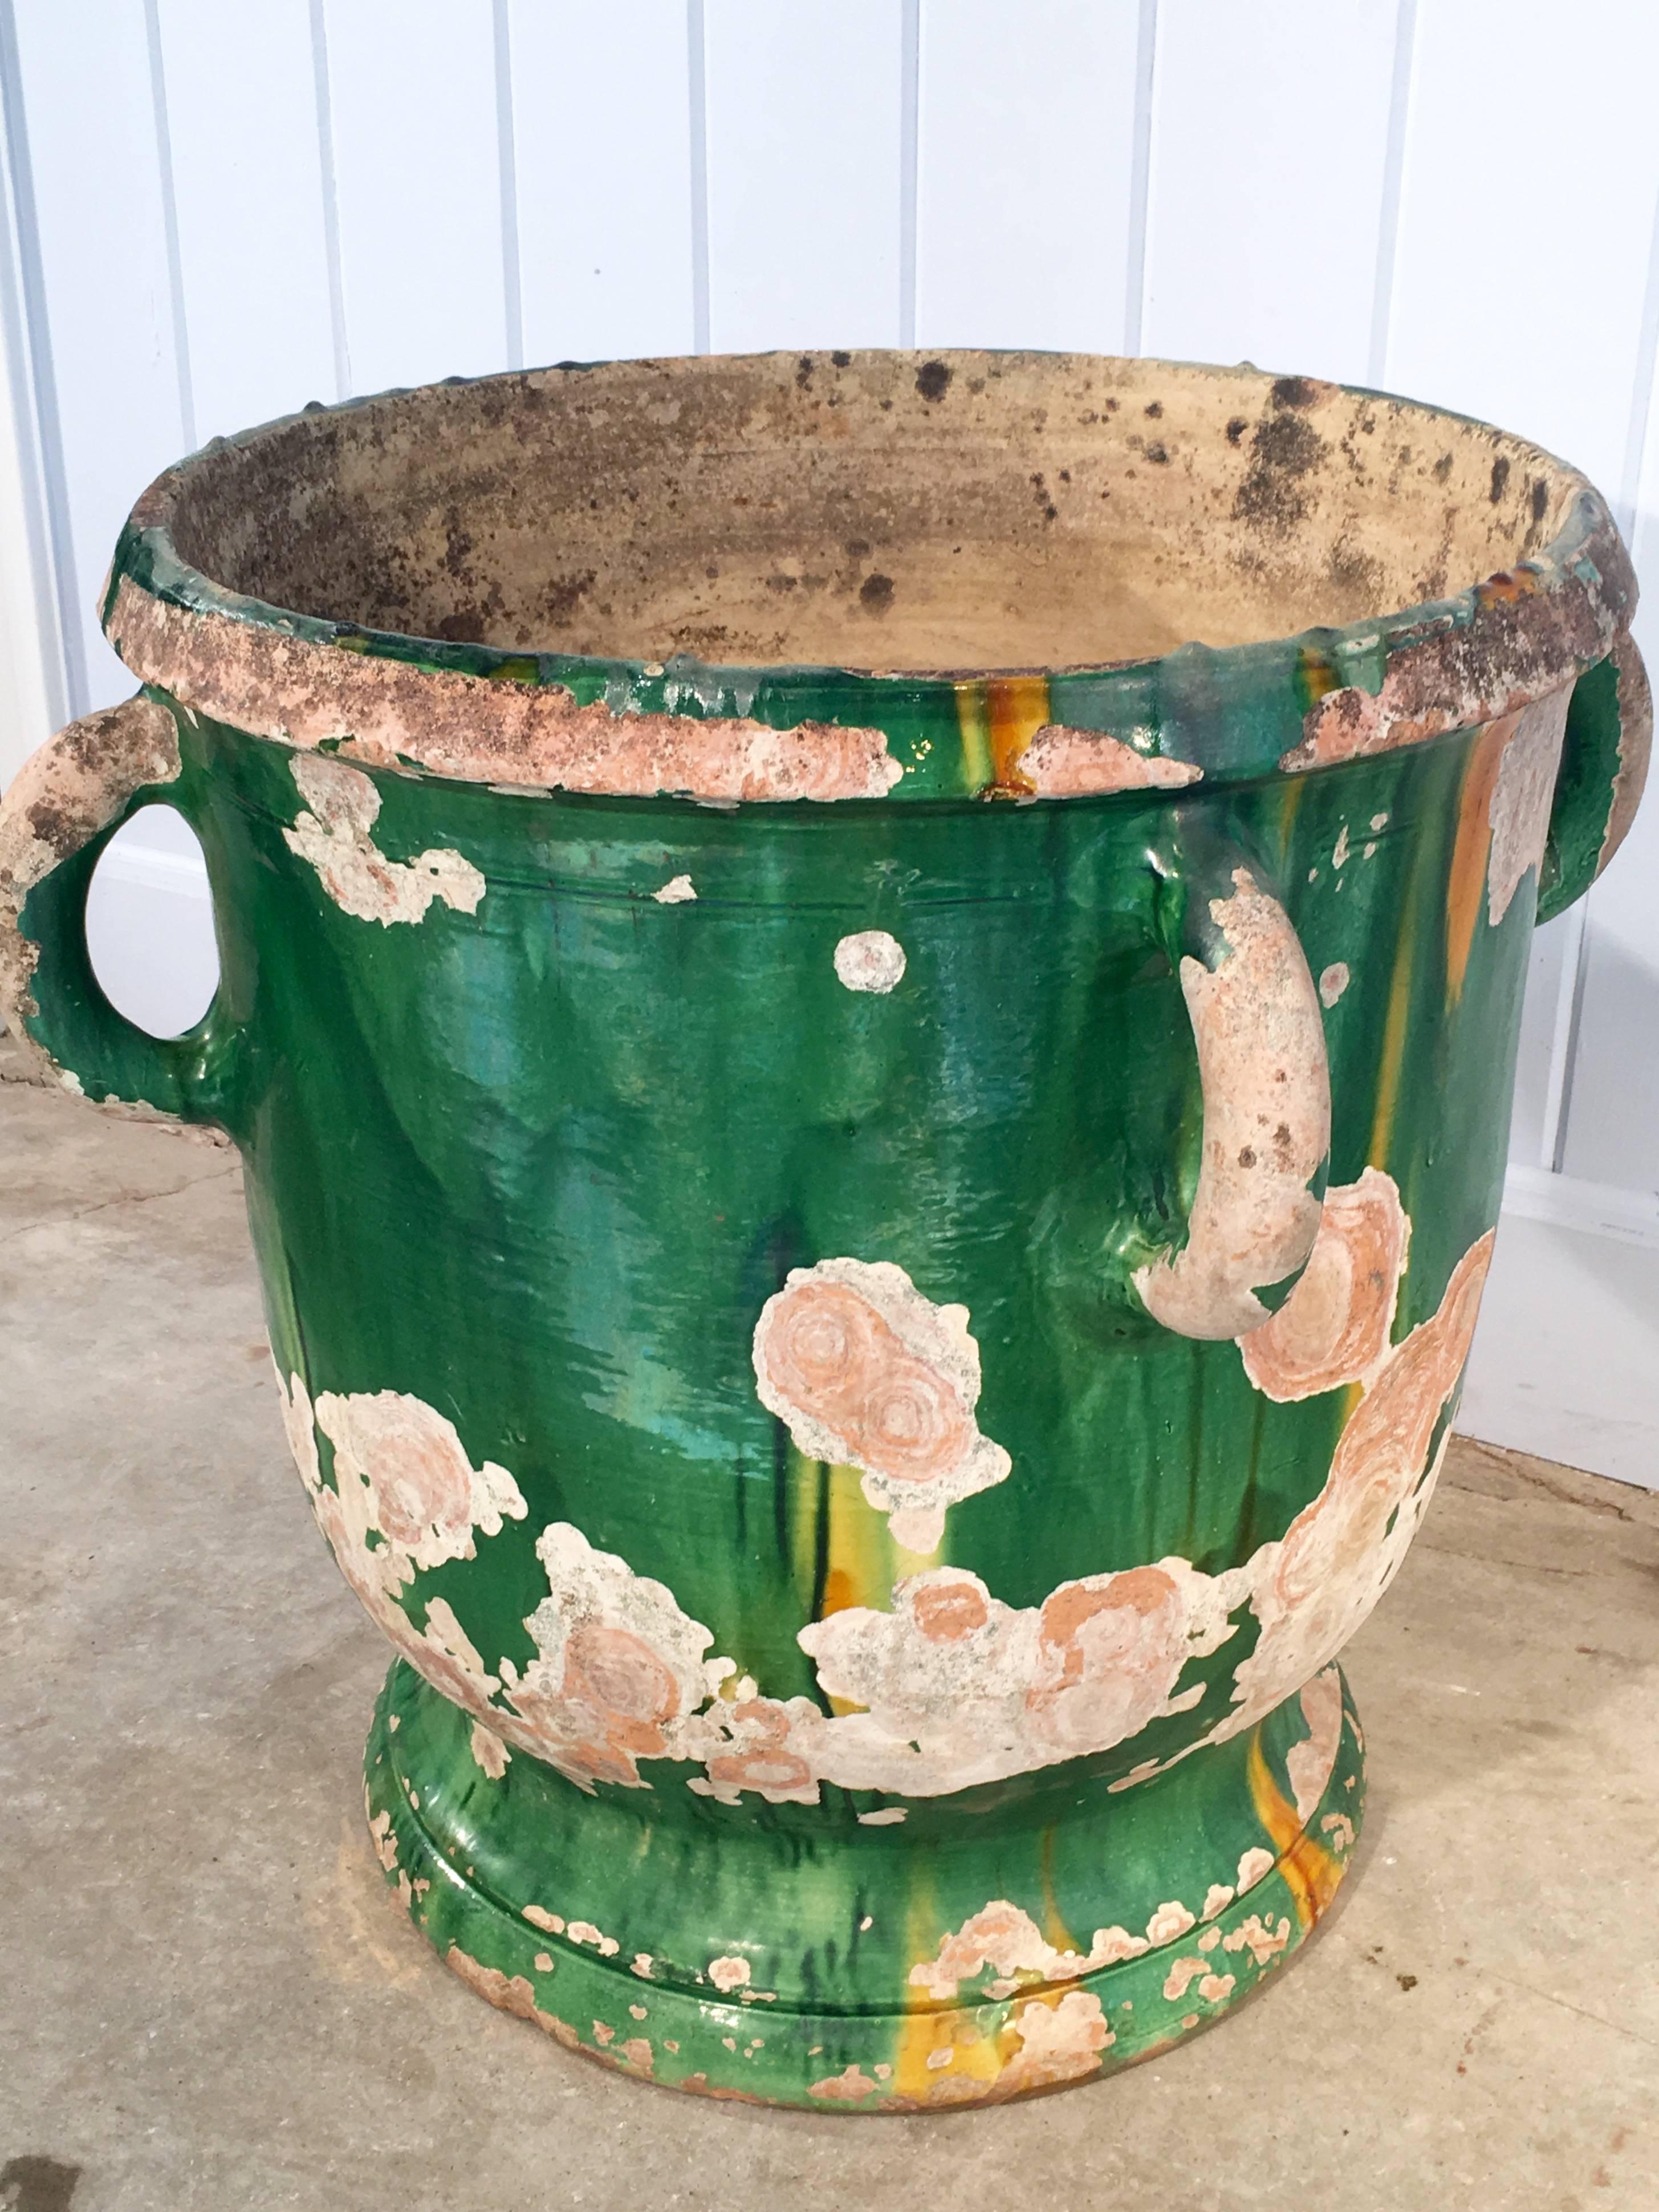 We love the intense green glaze of Castelnaudary planters, and this one is all the more beautiful for its chipped glazed surface that shows various hues of pink and white beneath the emerald green. Of medium size, this piece would be best grouped